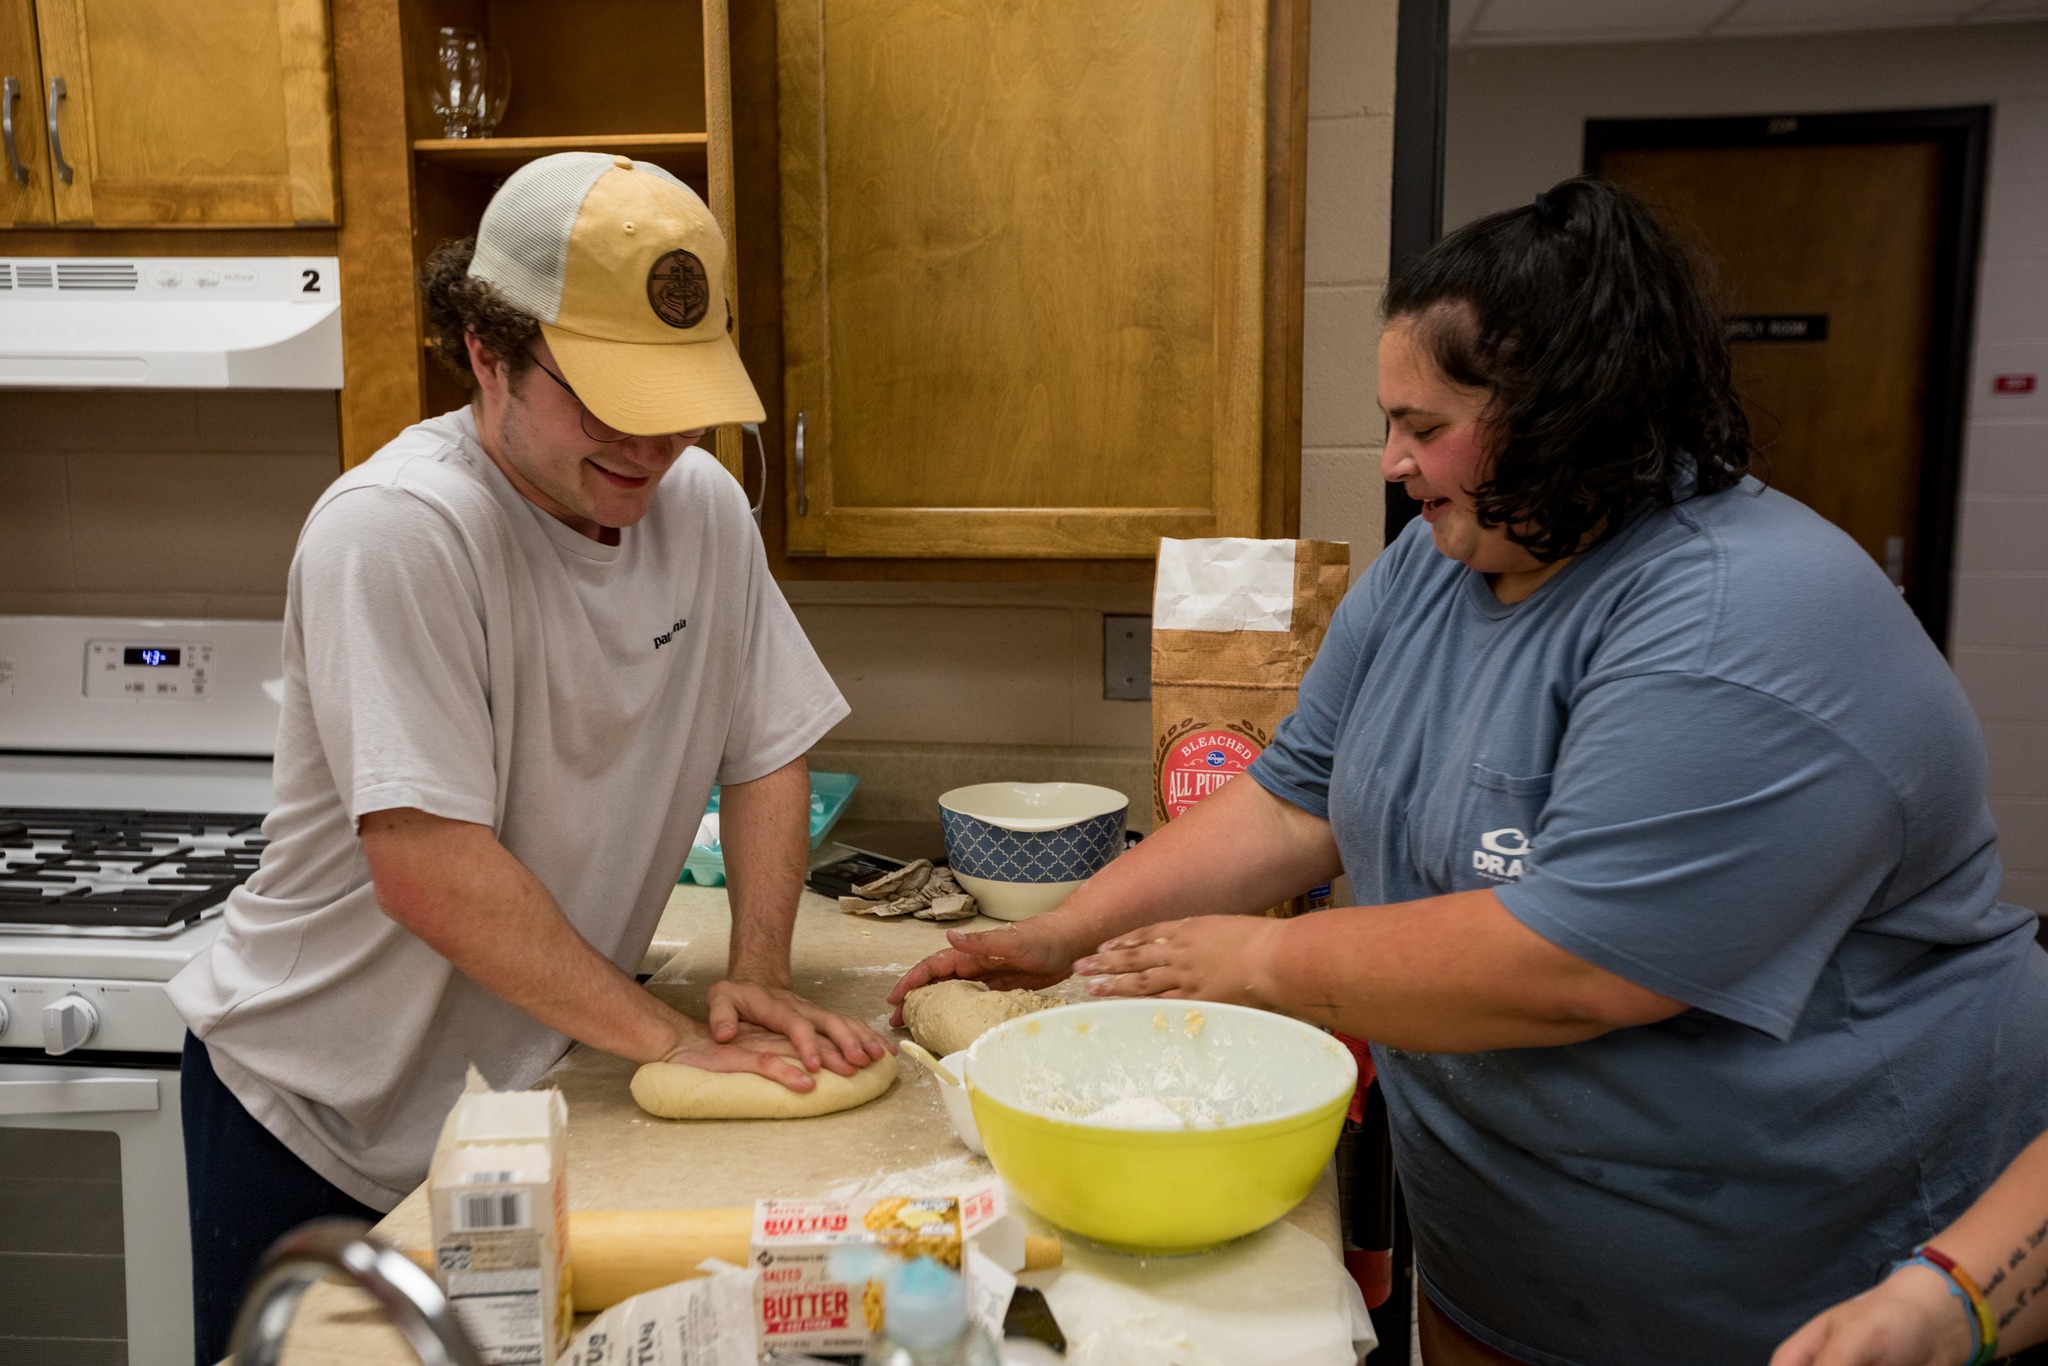 Two WKU students cook in a food lab.